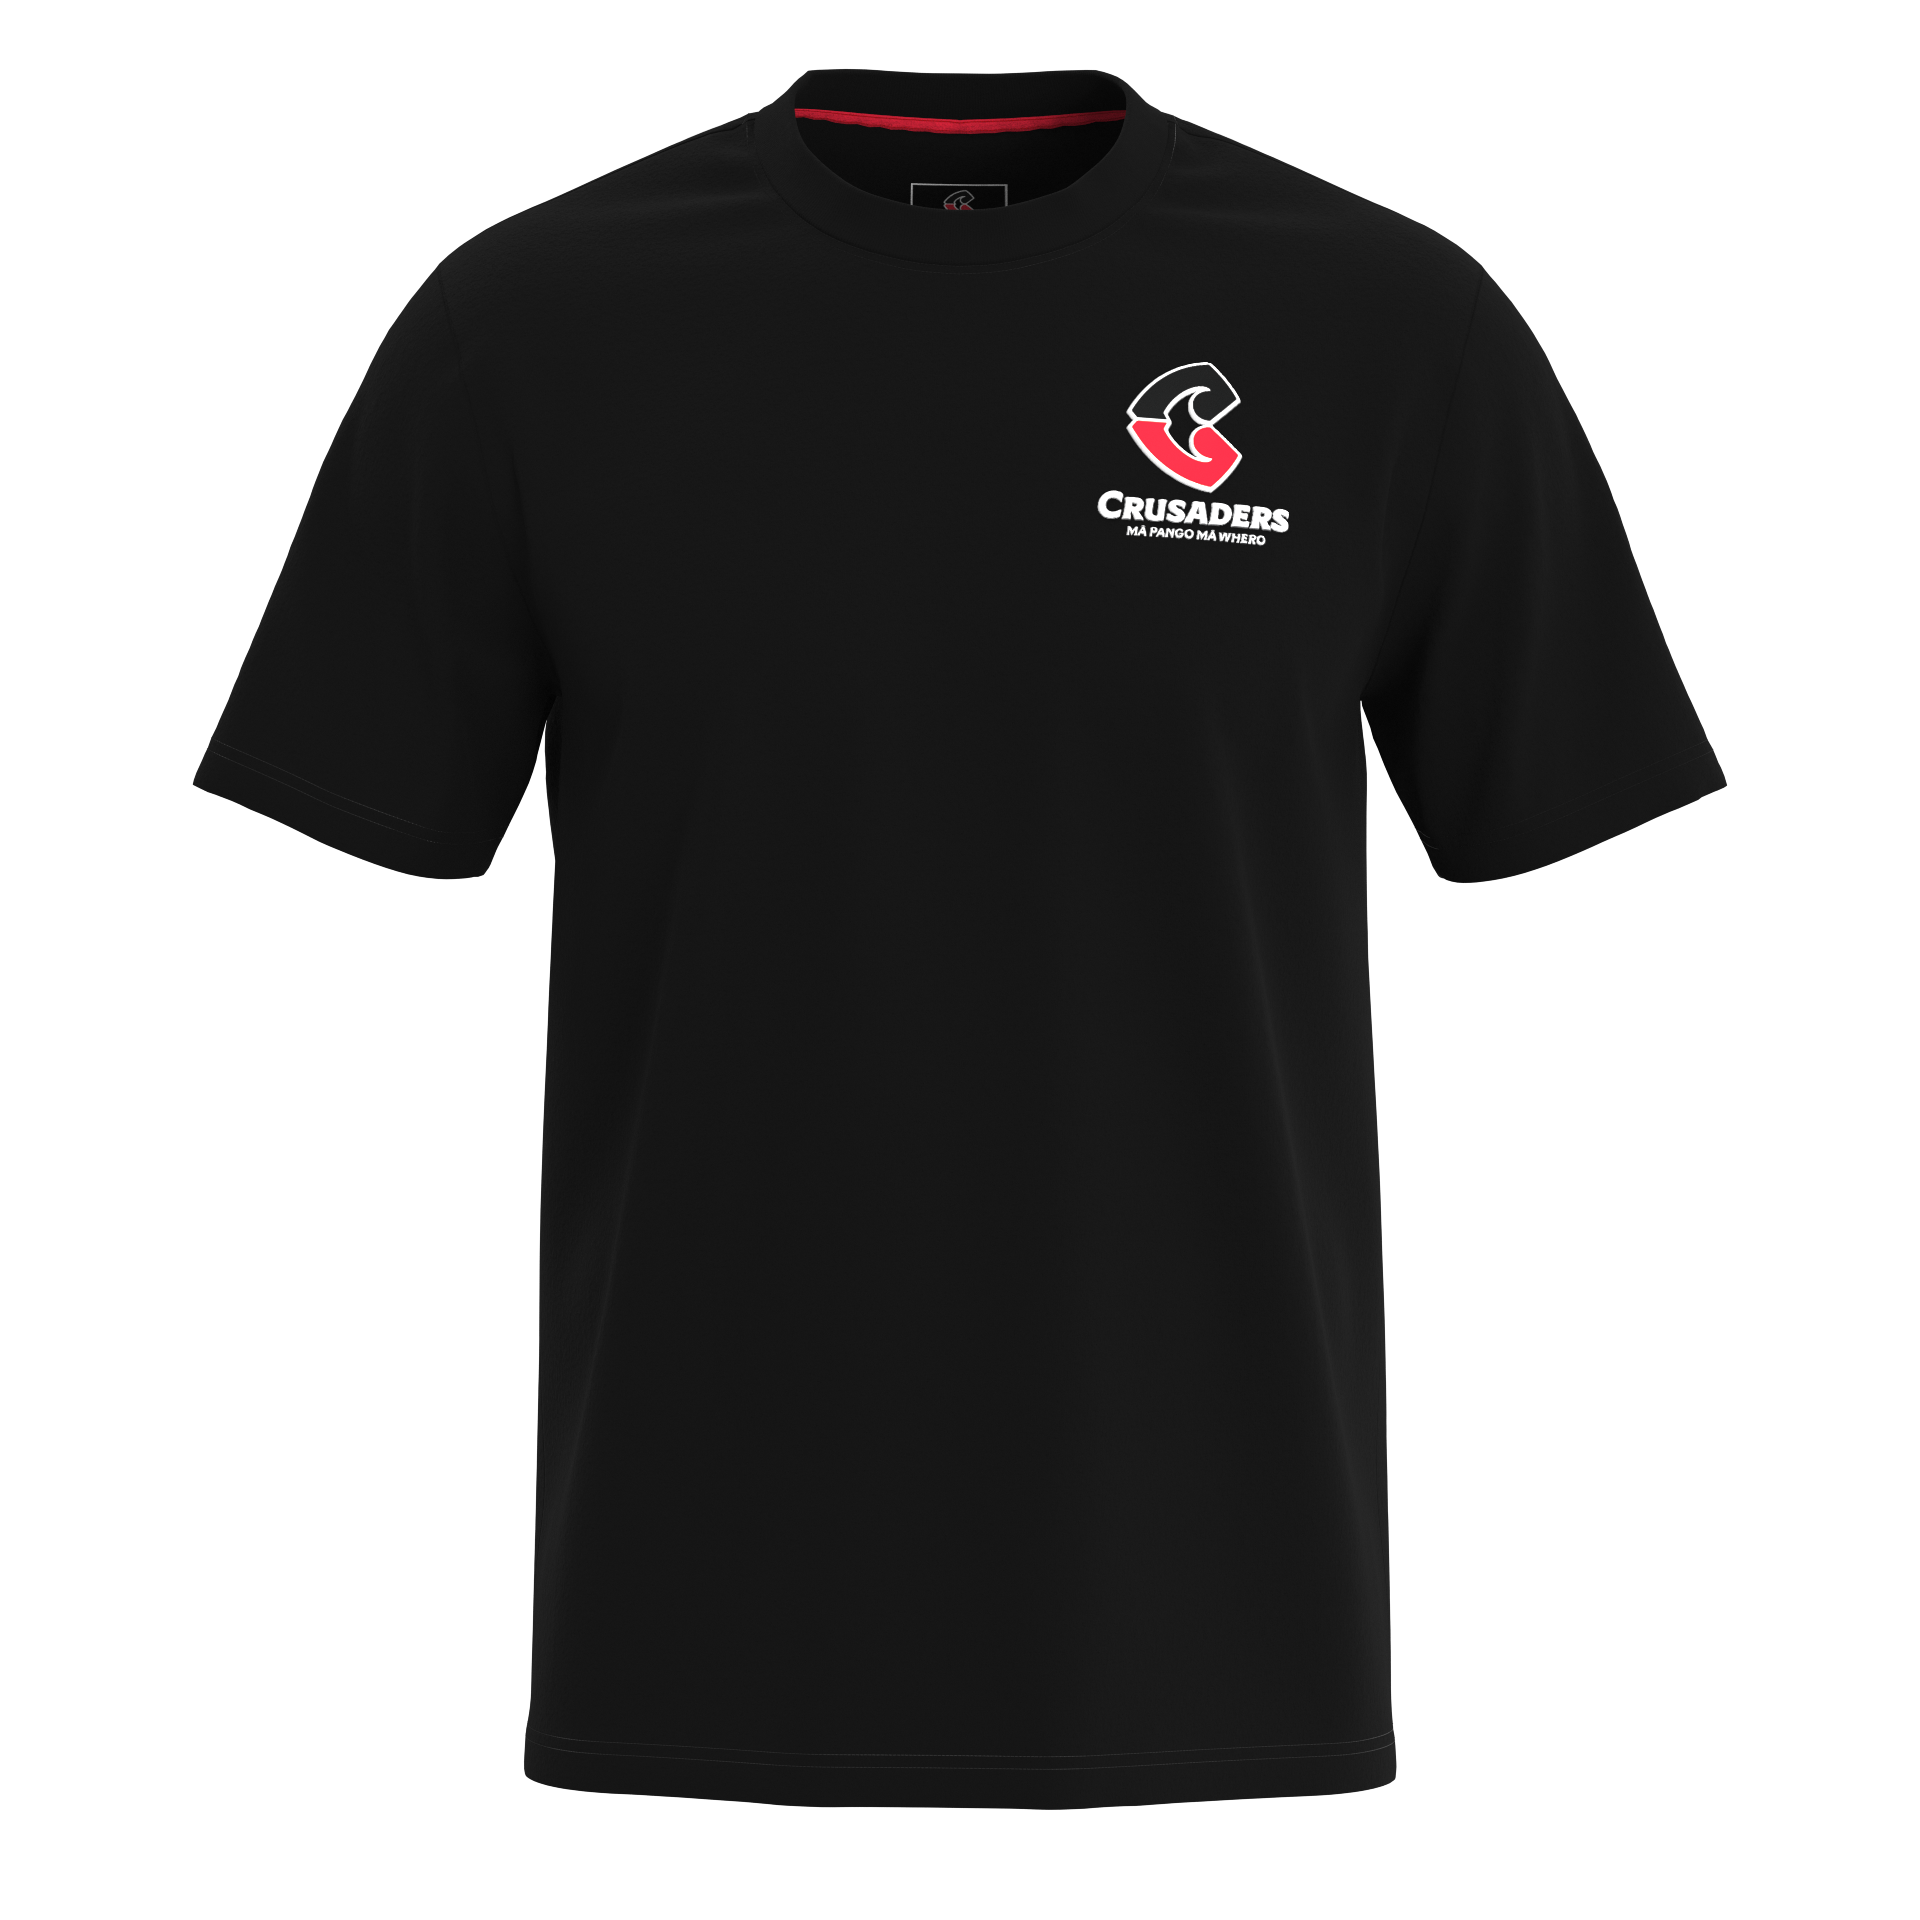 Crusaders Youth Cotton Tee